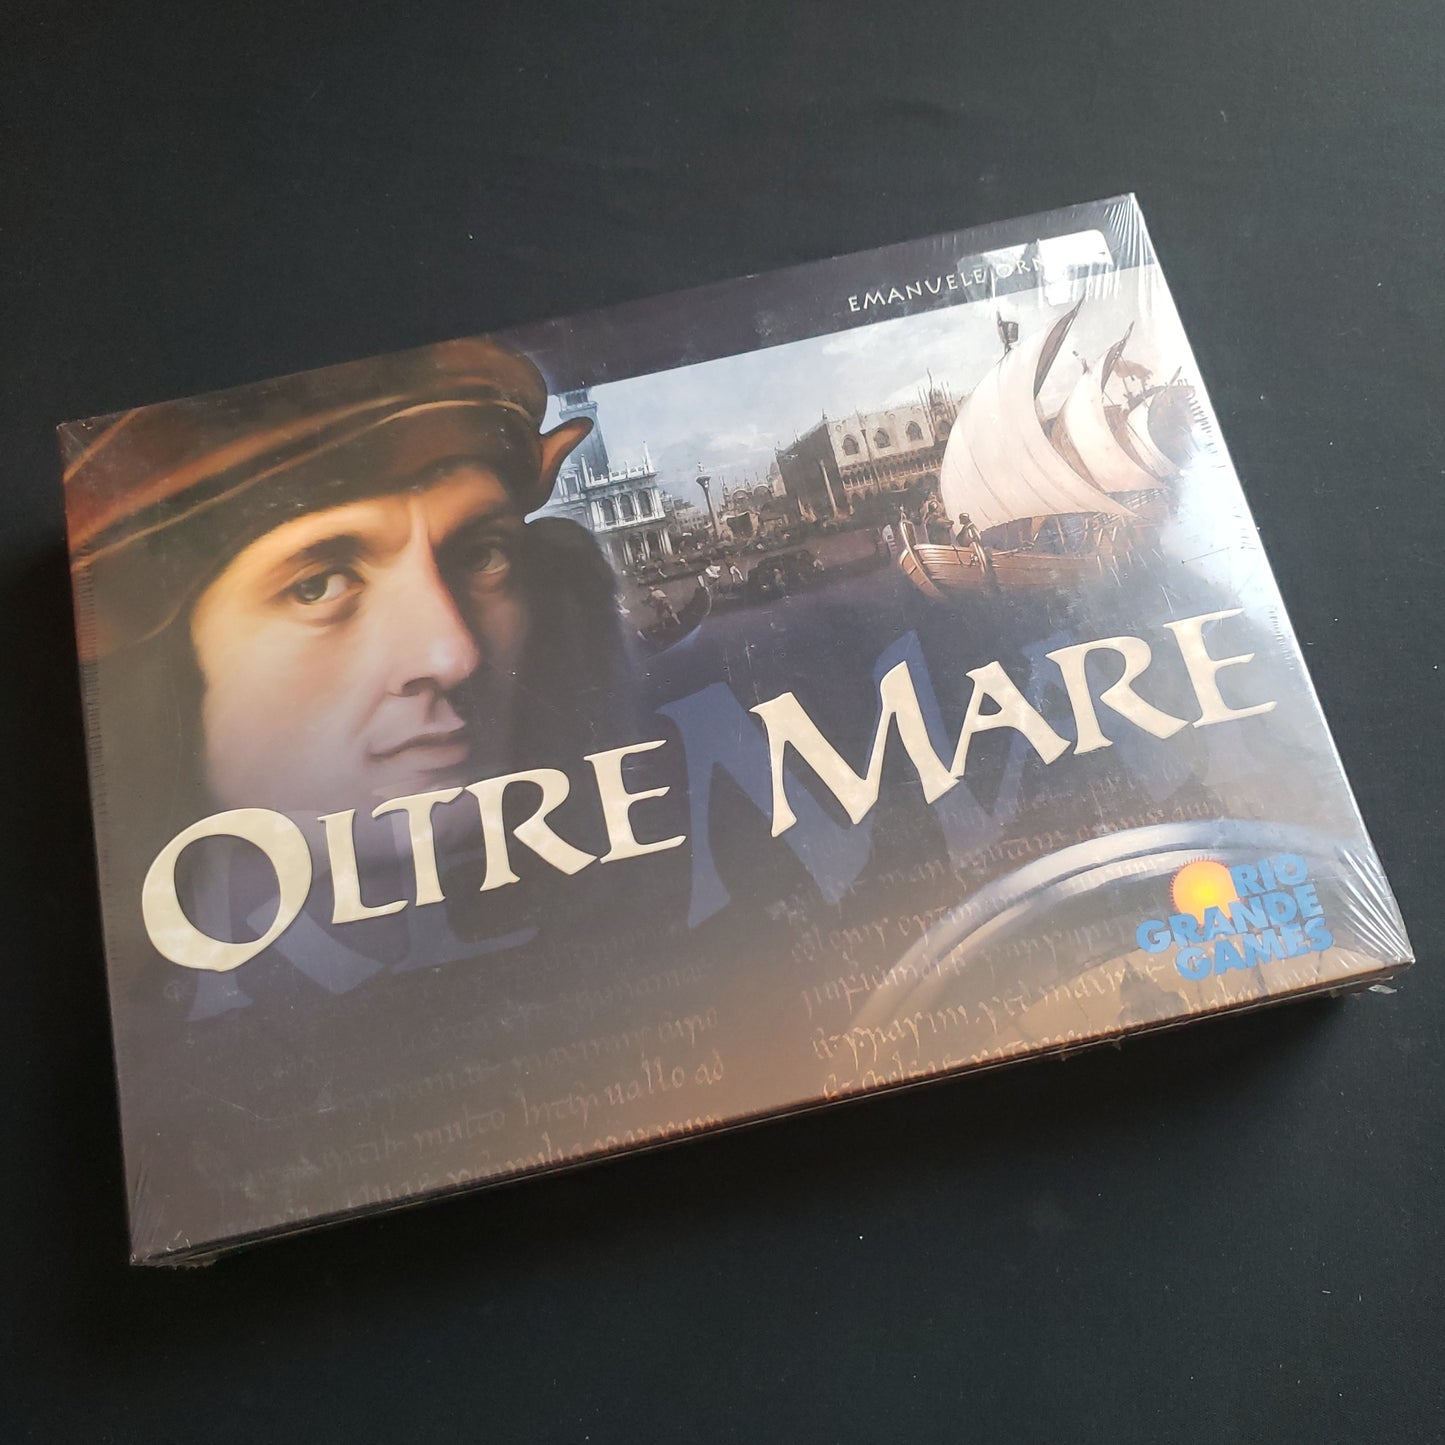 Image shows the front cover of the box of the Oltre Mare board game